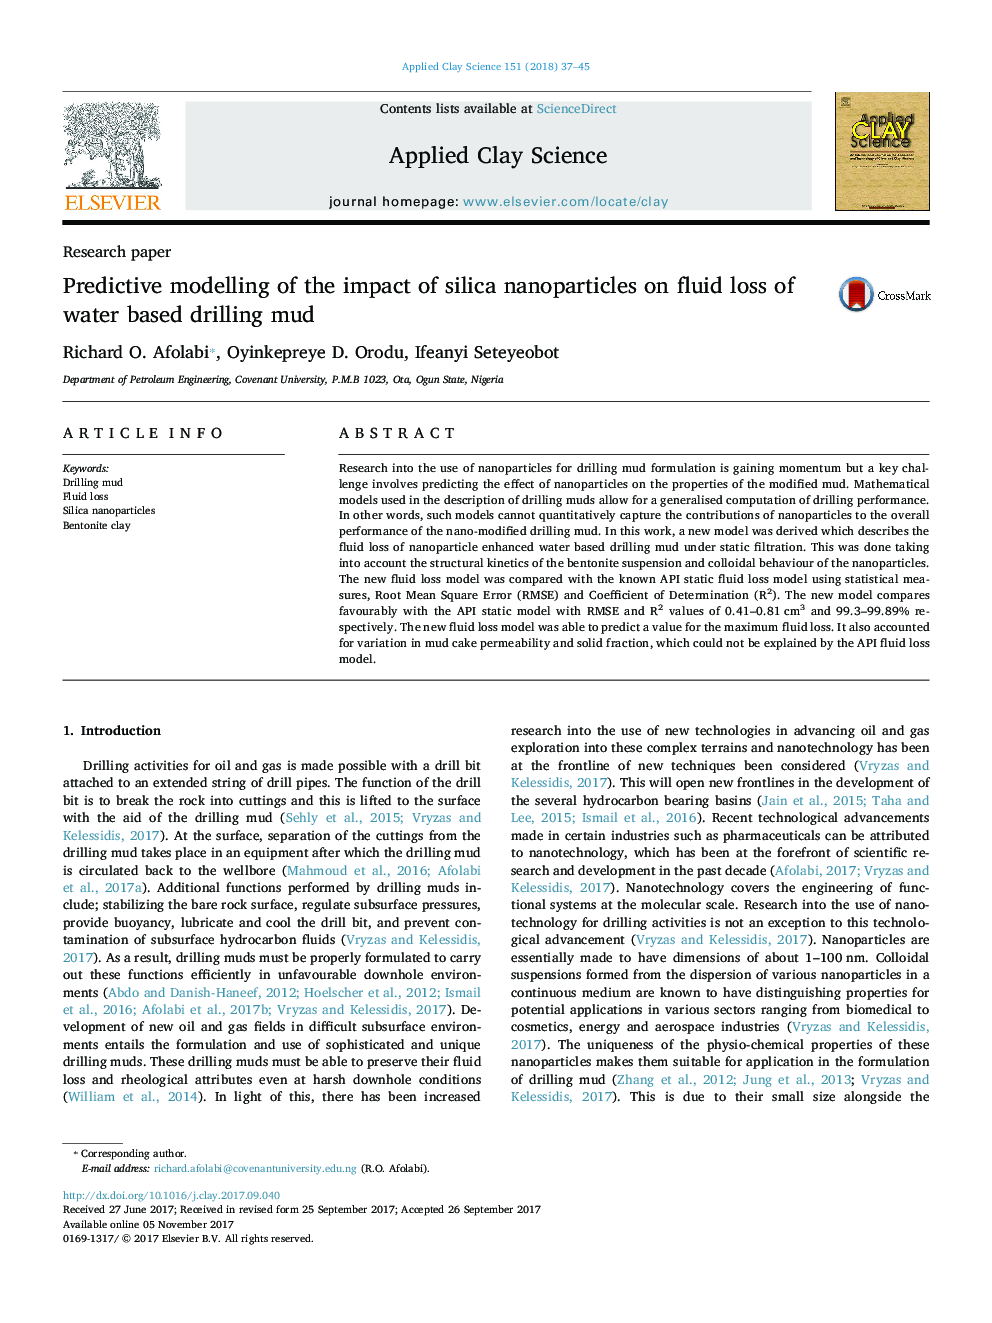 Predictive modelling of the impact of silica nanoparticles on fluid loss of water based drilling mud